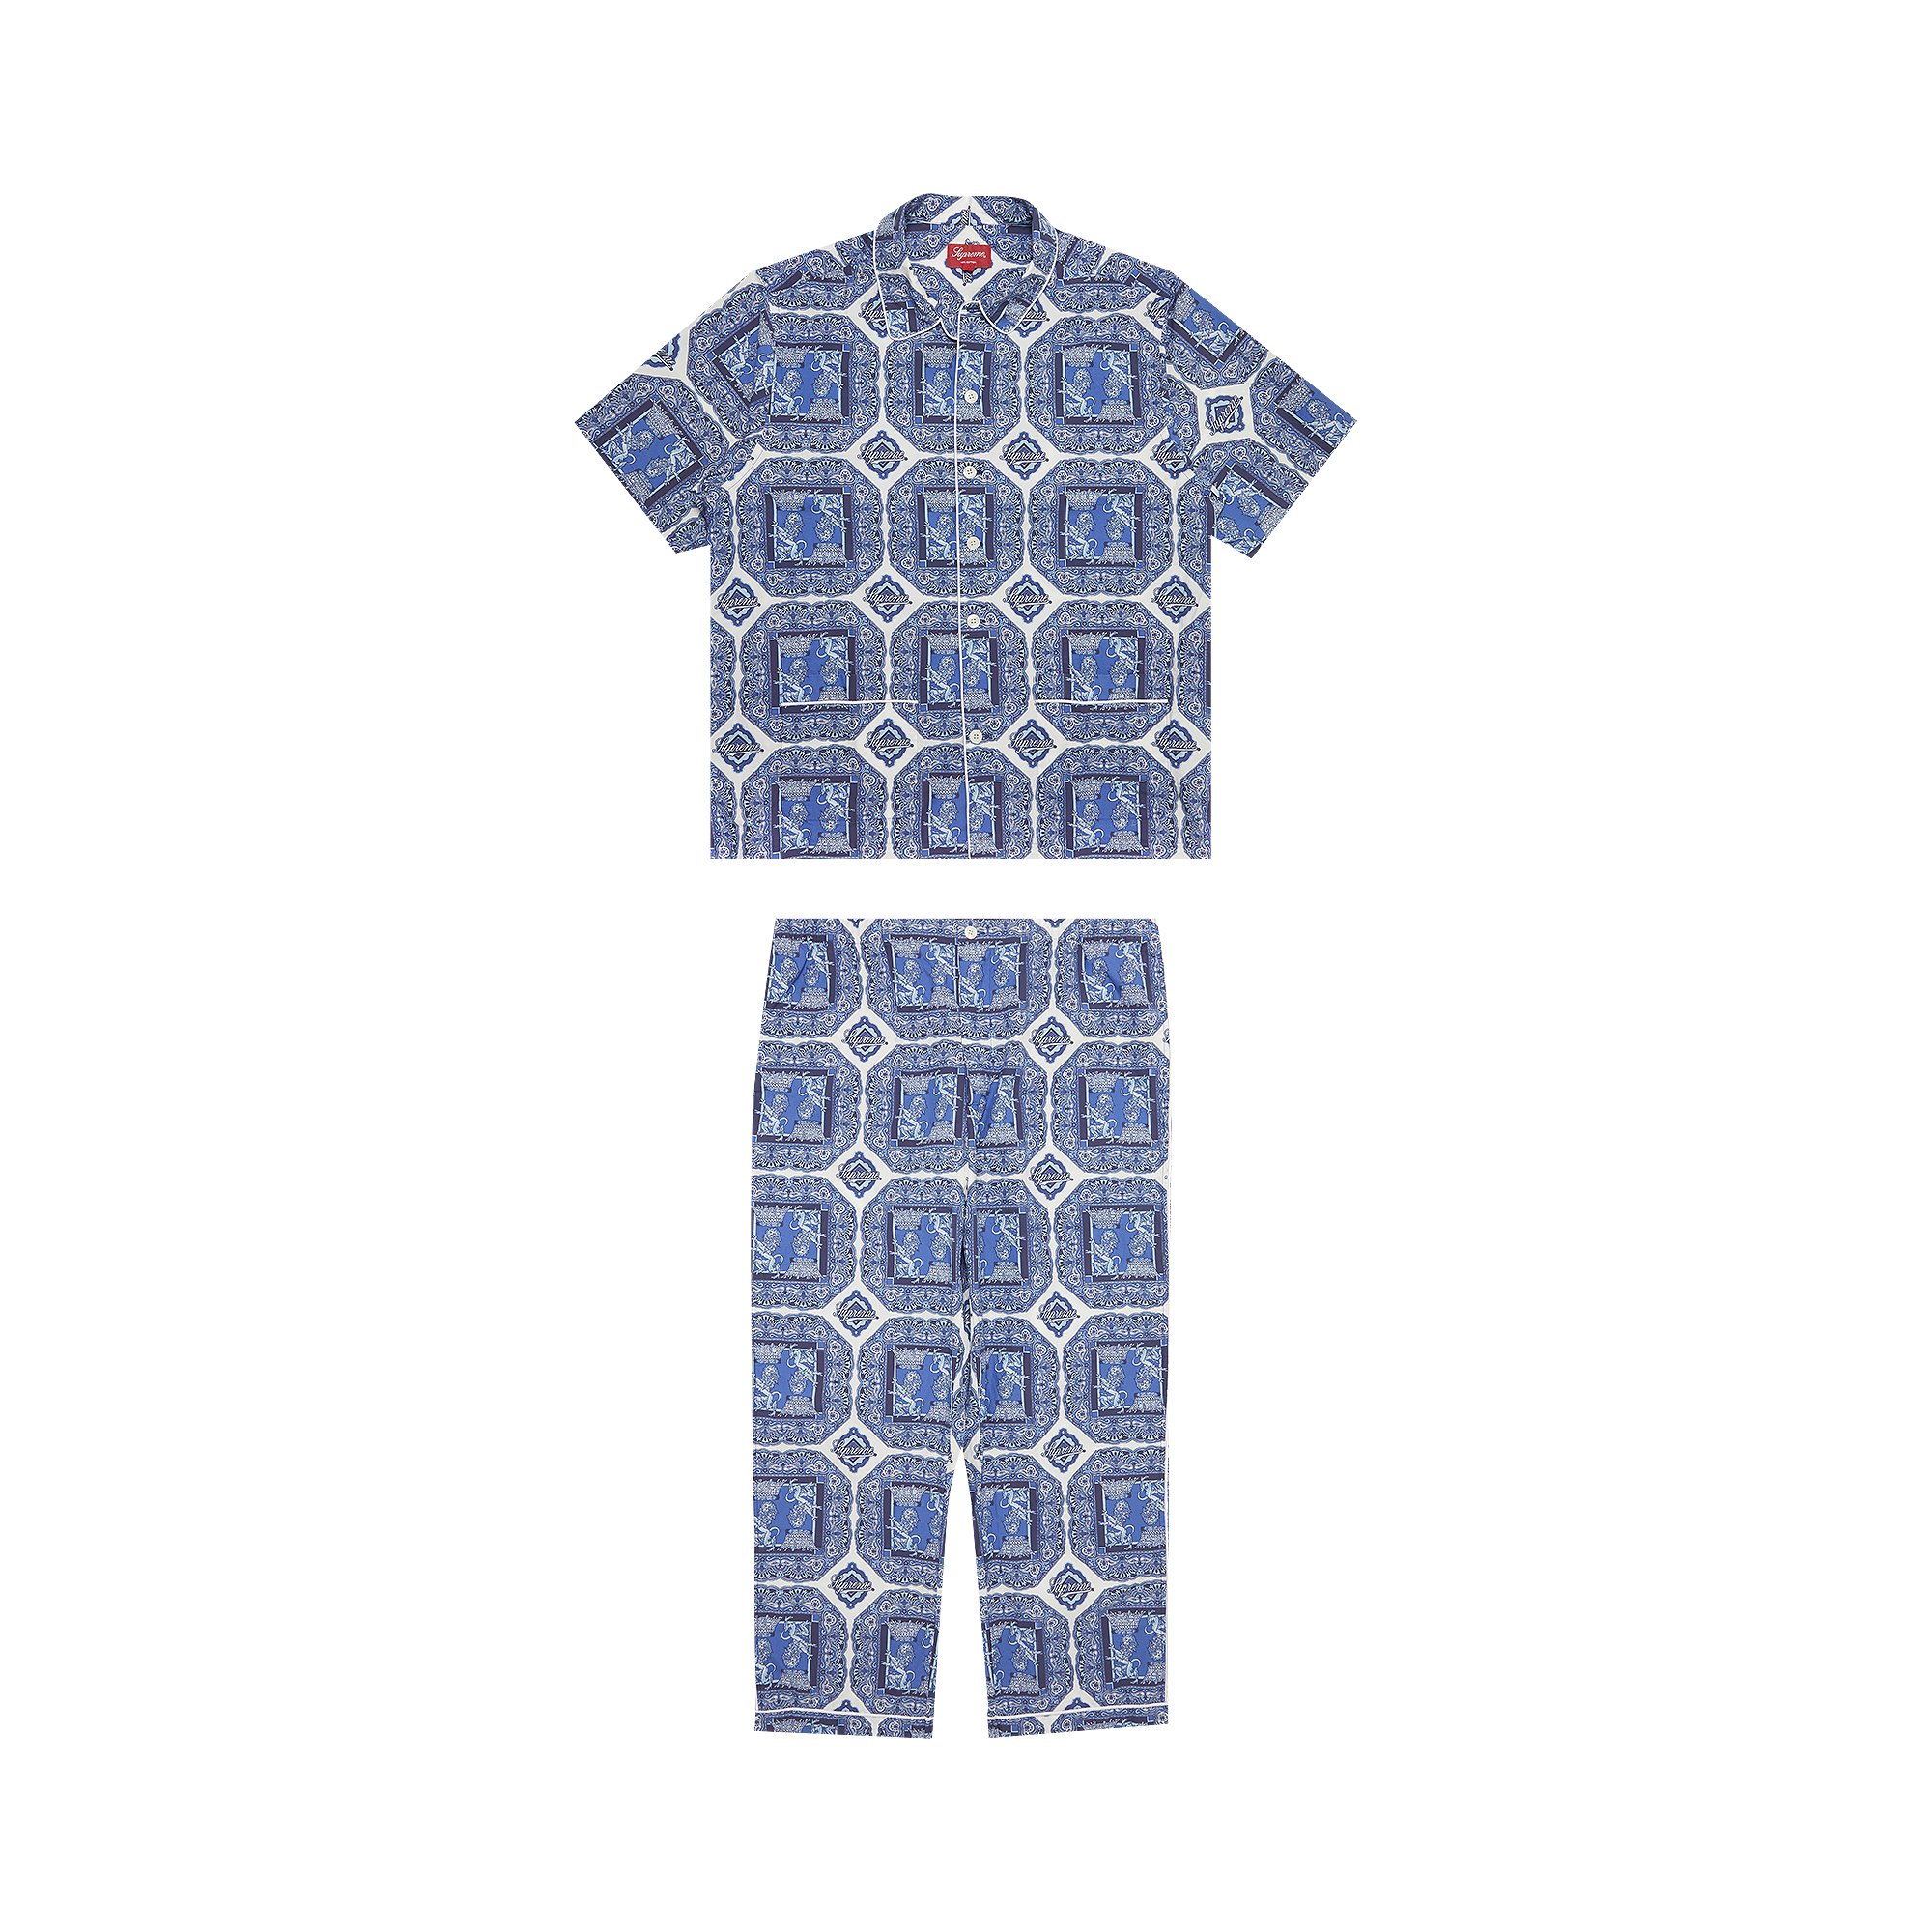 Supreme Pajama Set – Not Your Father's Gear